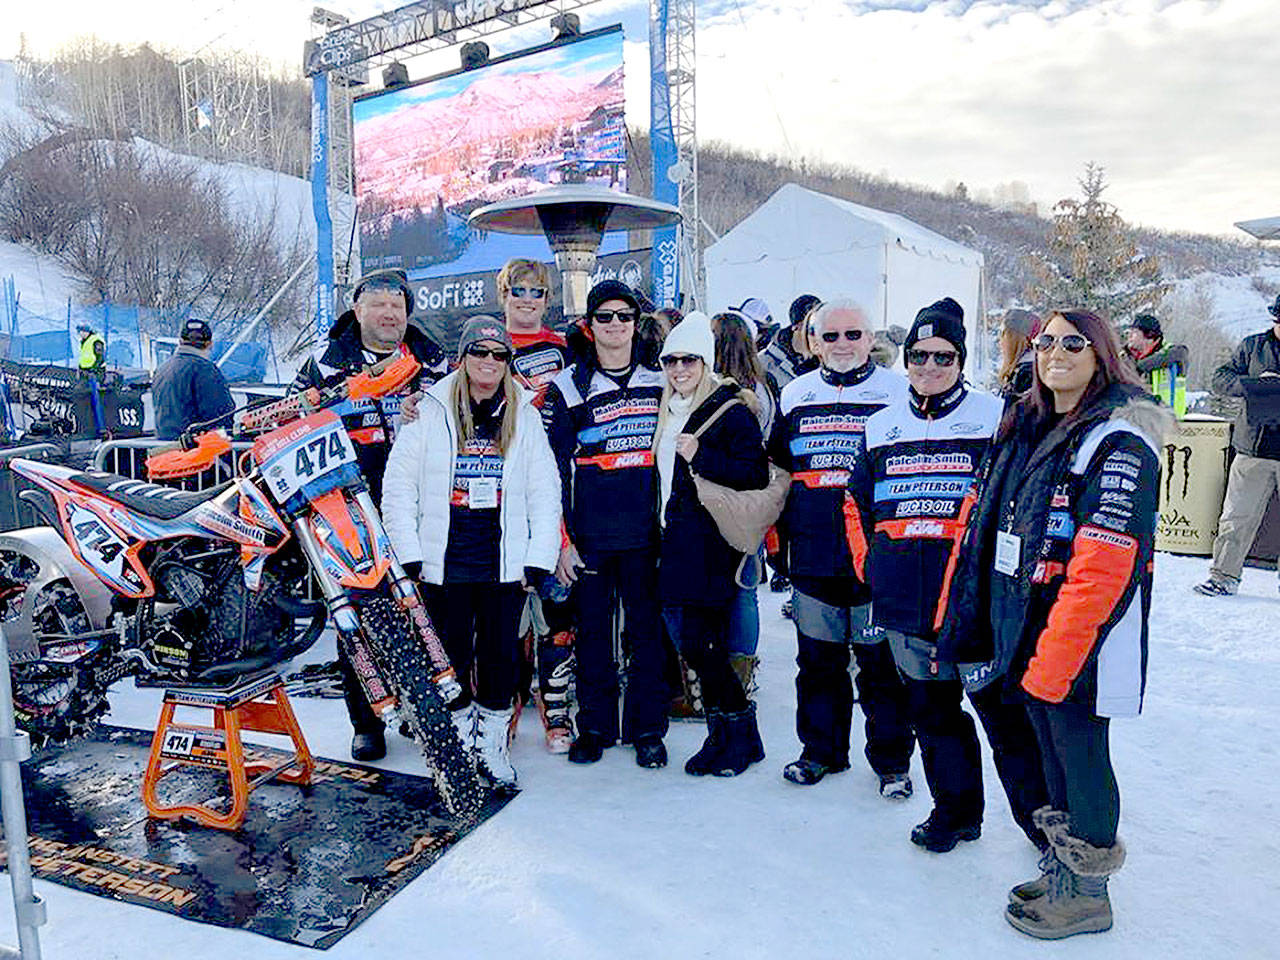 Port Angeles’ Jake Anstett, in rear third from left, poses with his Team Peterson Racing teammates after winning the bronze medal in the snow hill climb at the X Games on Sunday in Aspen, Colo. (Team Peterson Racing)